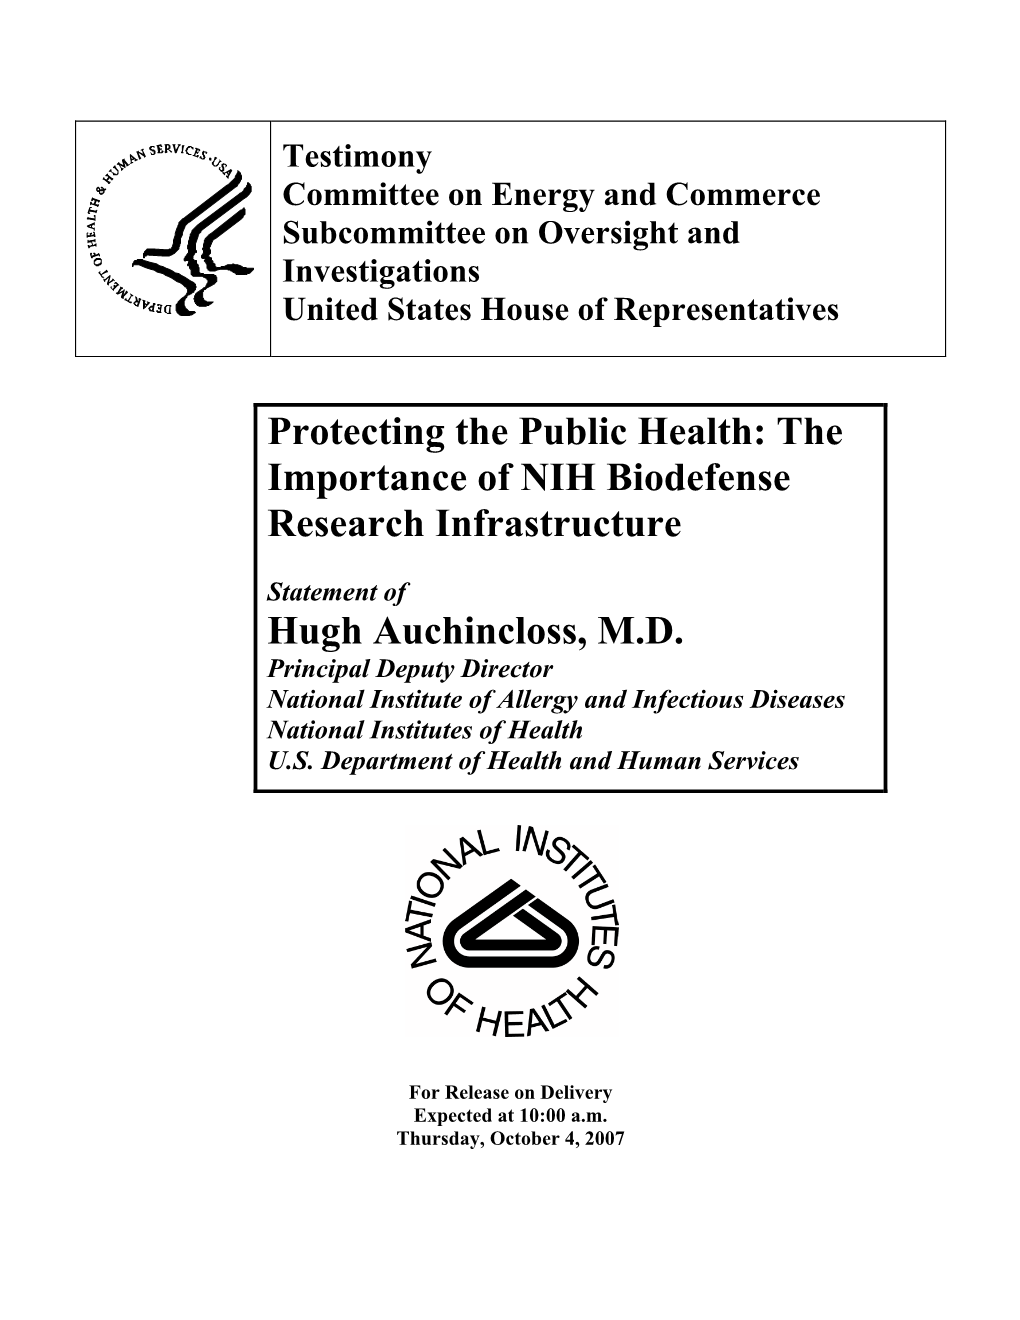 The Importance of NIH Biodefense Research Infrastructure